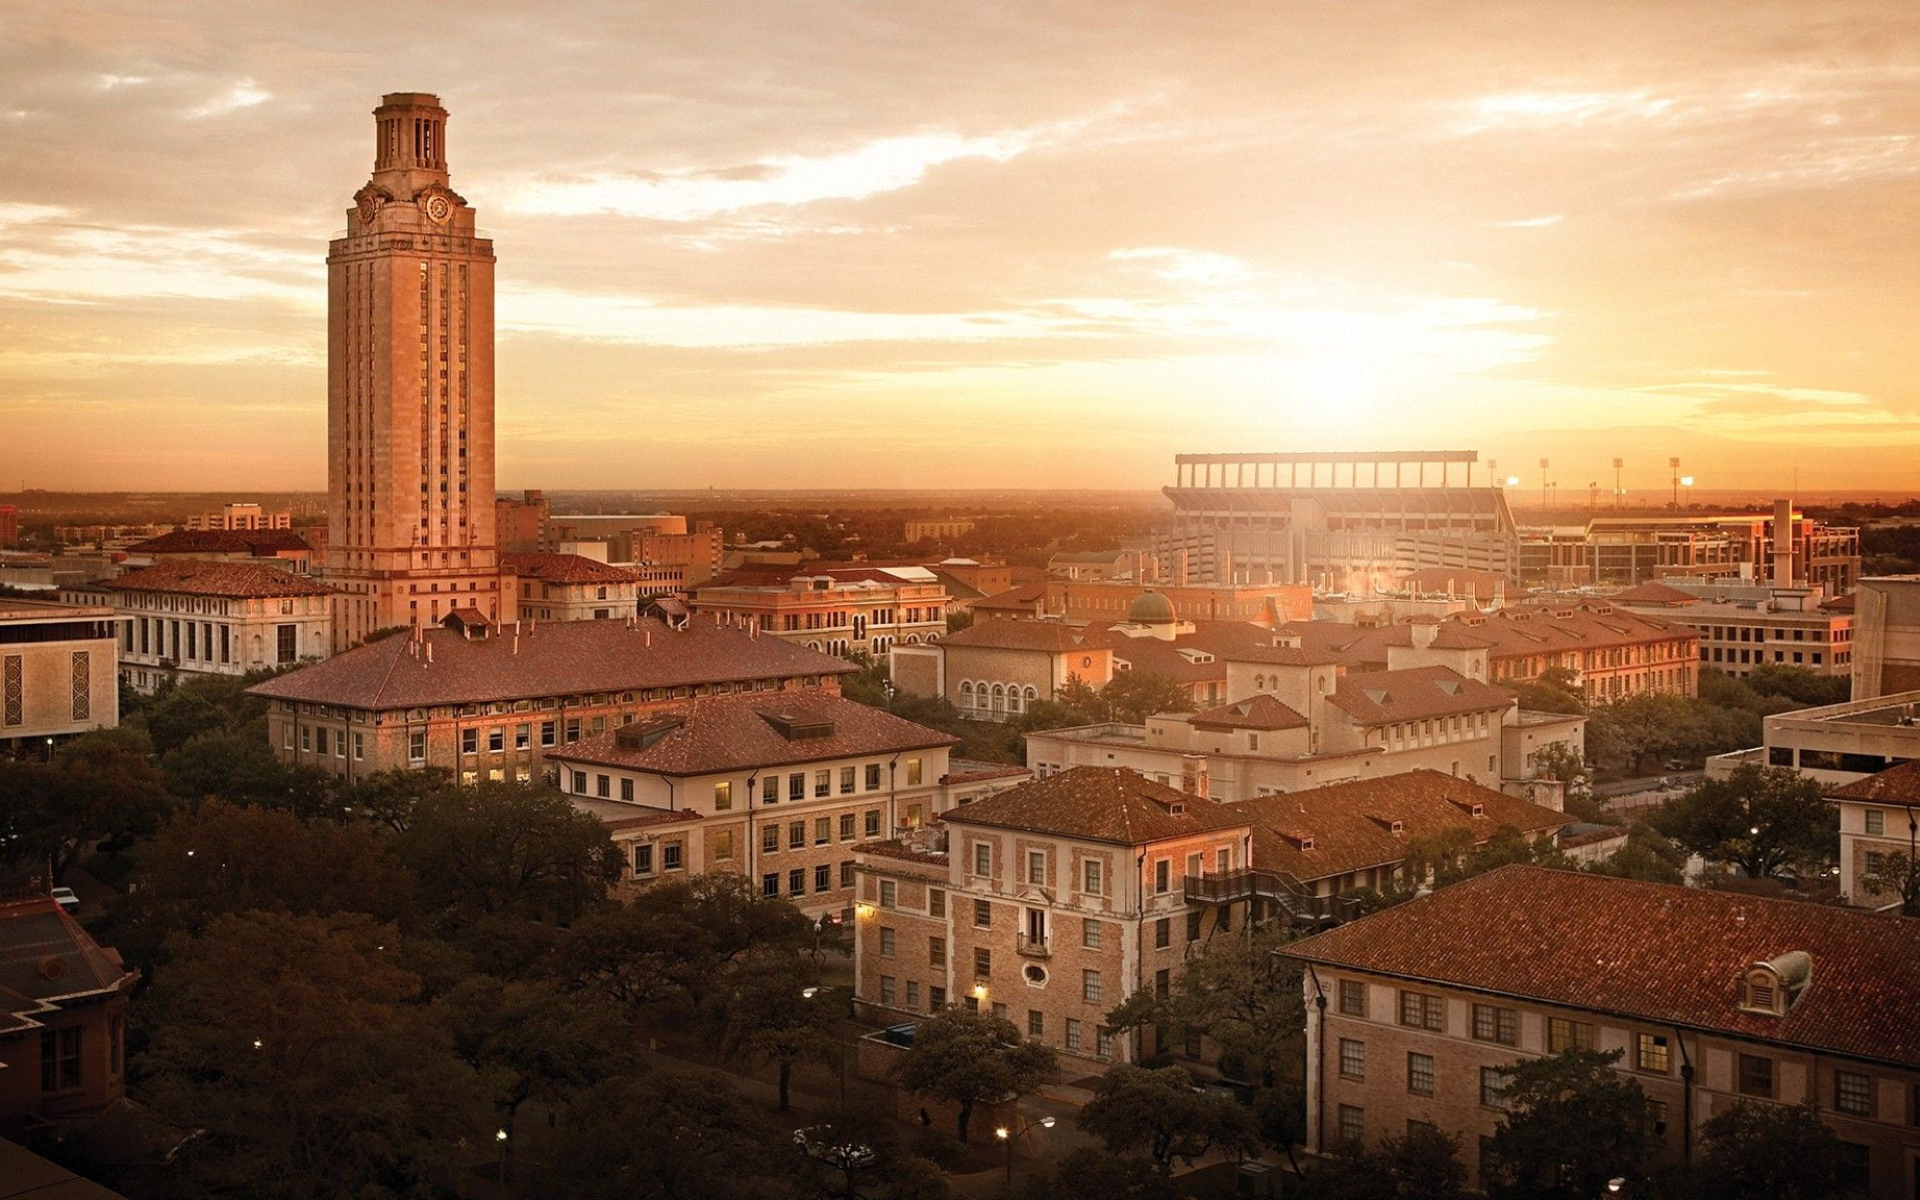 UT Austin tower and campus aerial view at sunrise